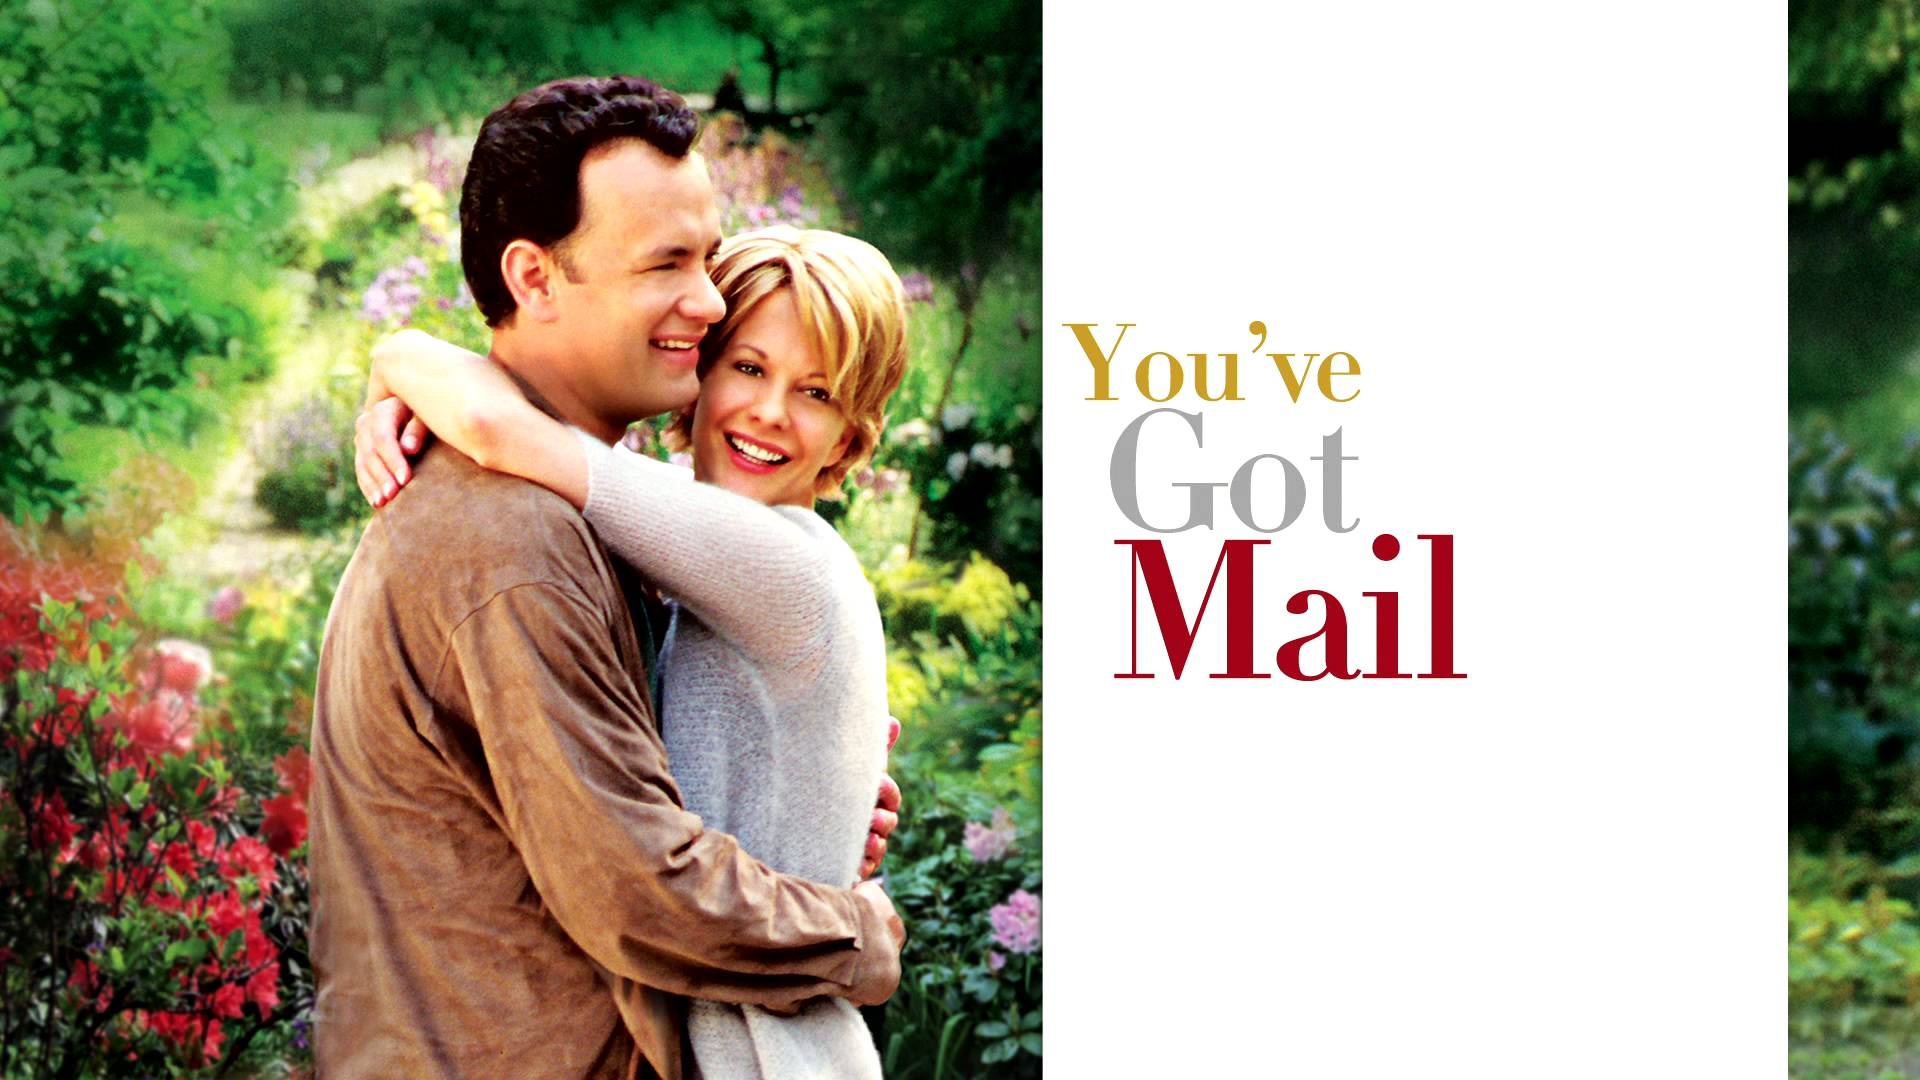 You've Got Mail, Fan-made wallpapers, Dedicated fans, Artistic expression, 1920x1080 Full HD Desktop